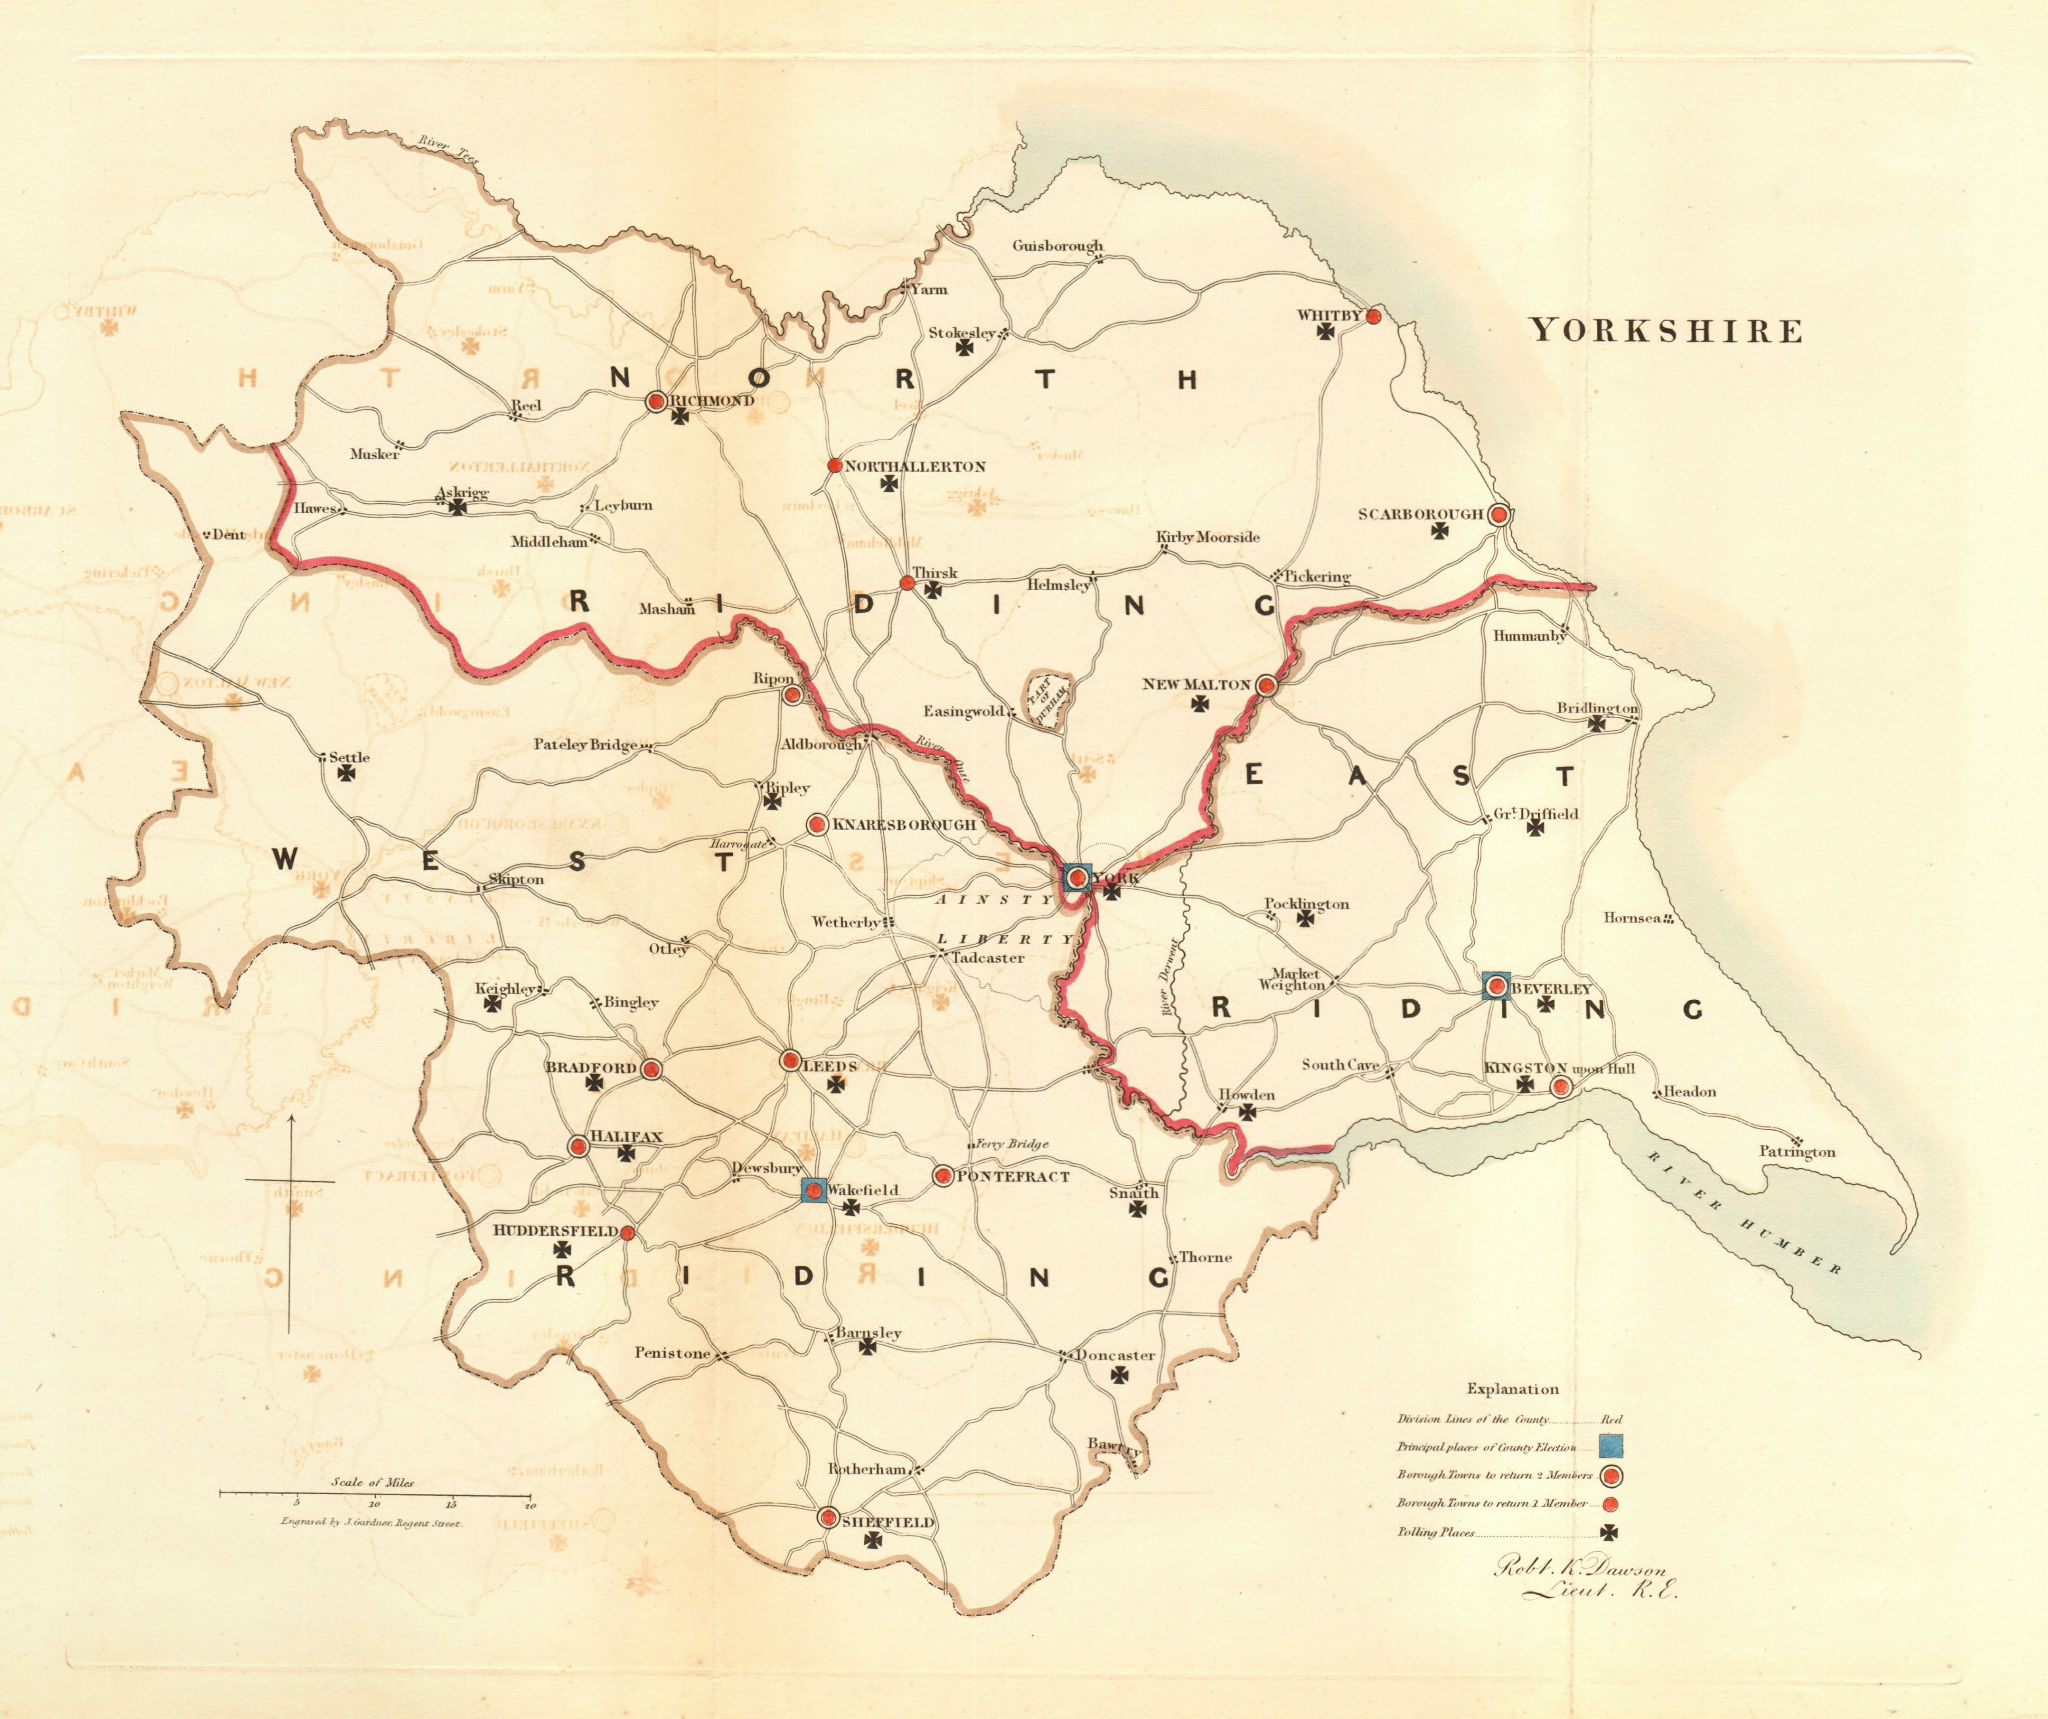 Yorkshire county map. Ridings boroughs electoral. REFORM ACT. DAWSON 1832